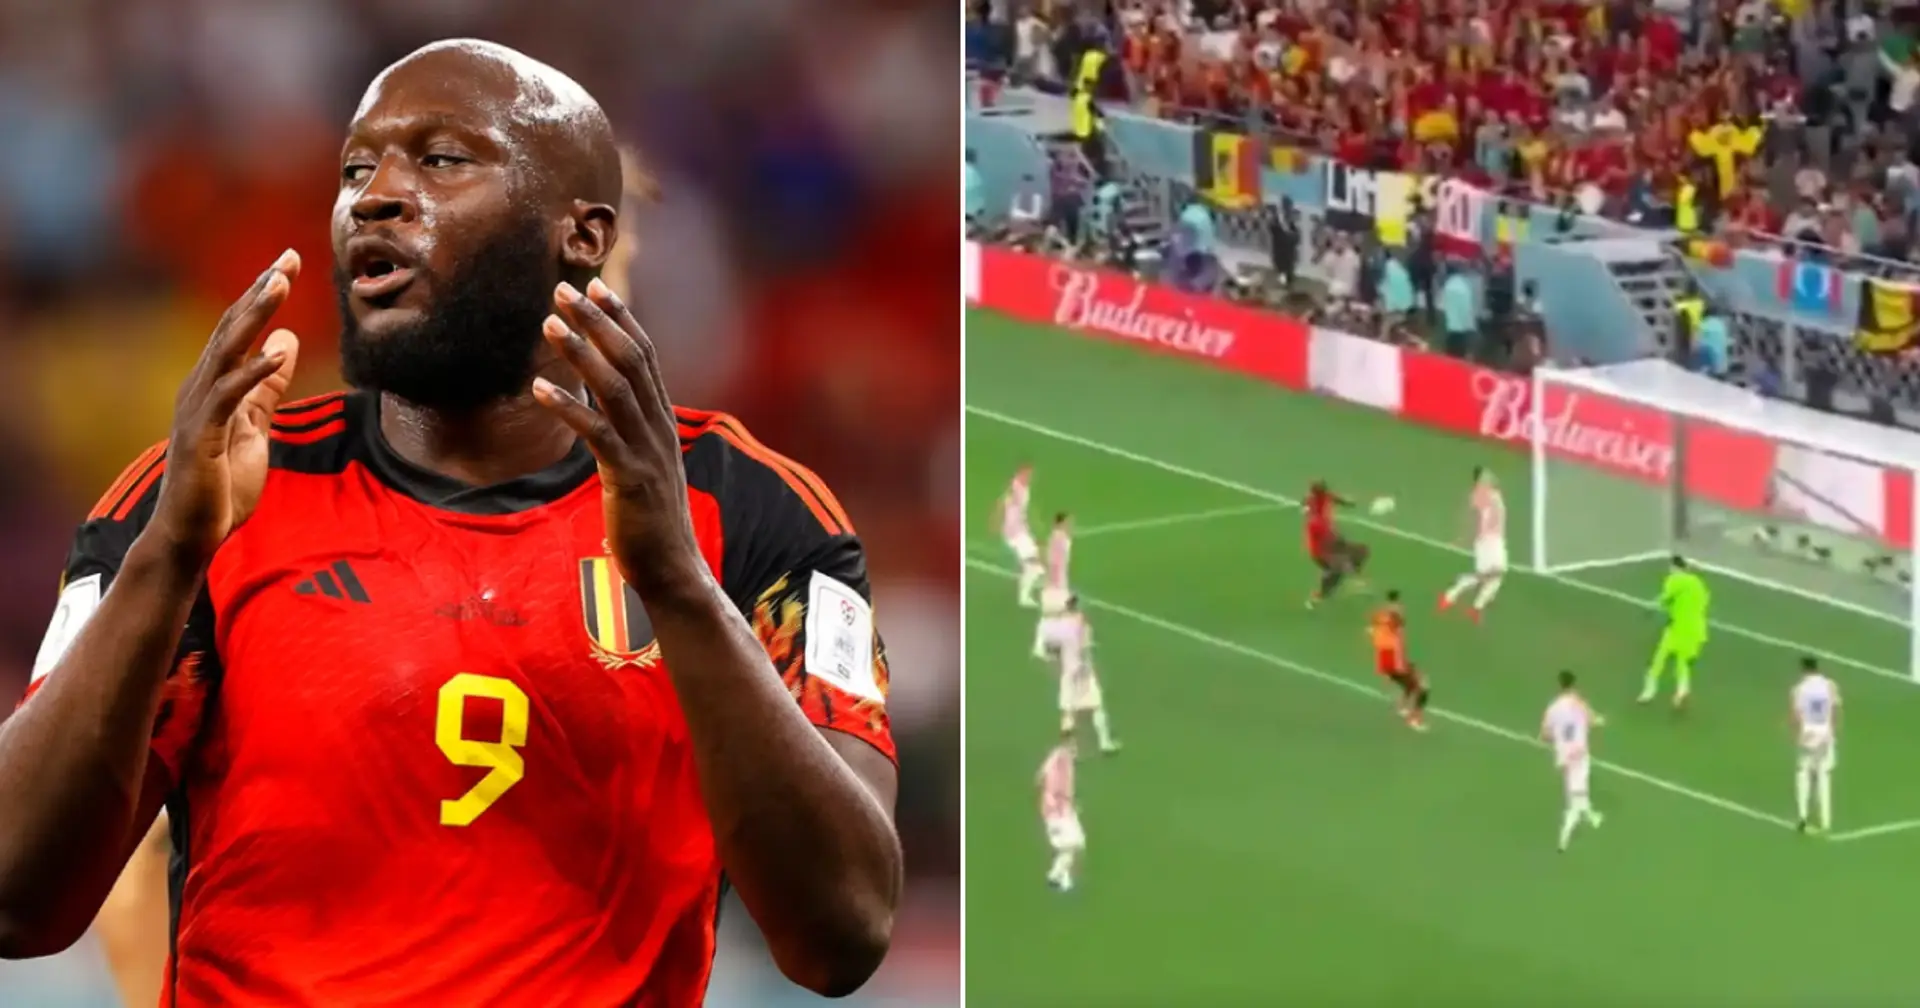 Lukaku who cost Chelsea £100m has just cost his country World Cup playoff with 4 sitters